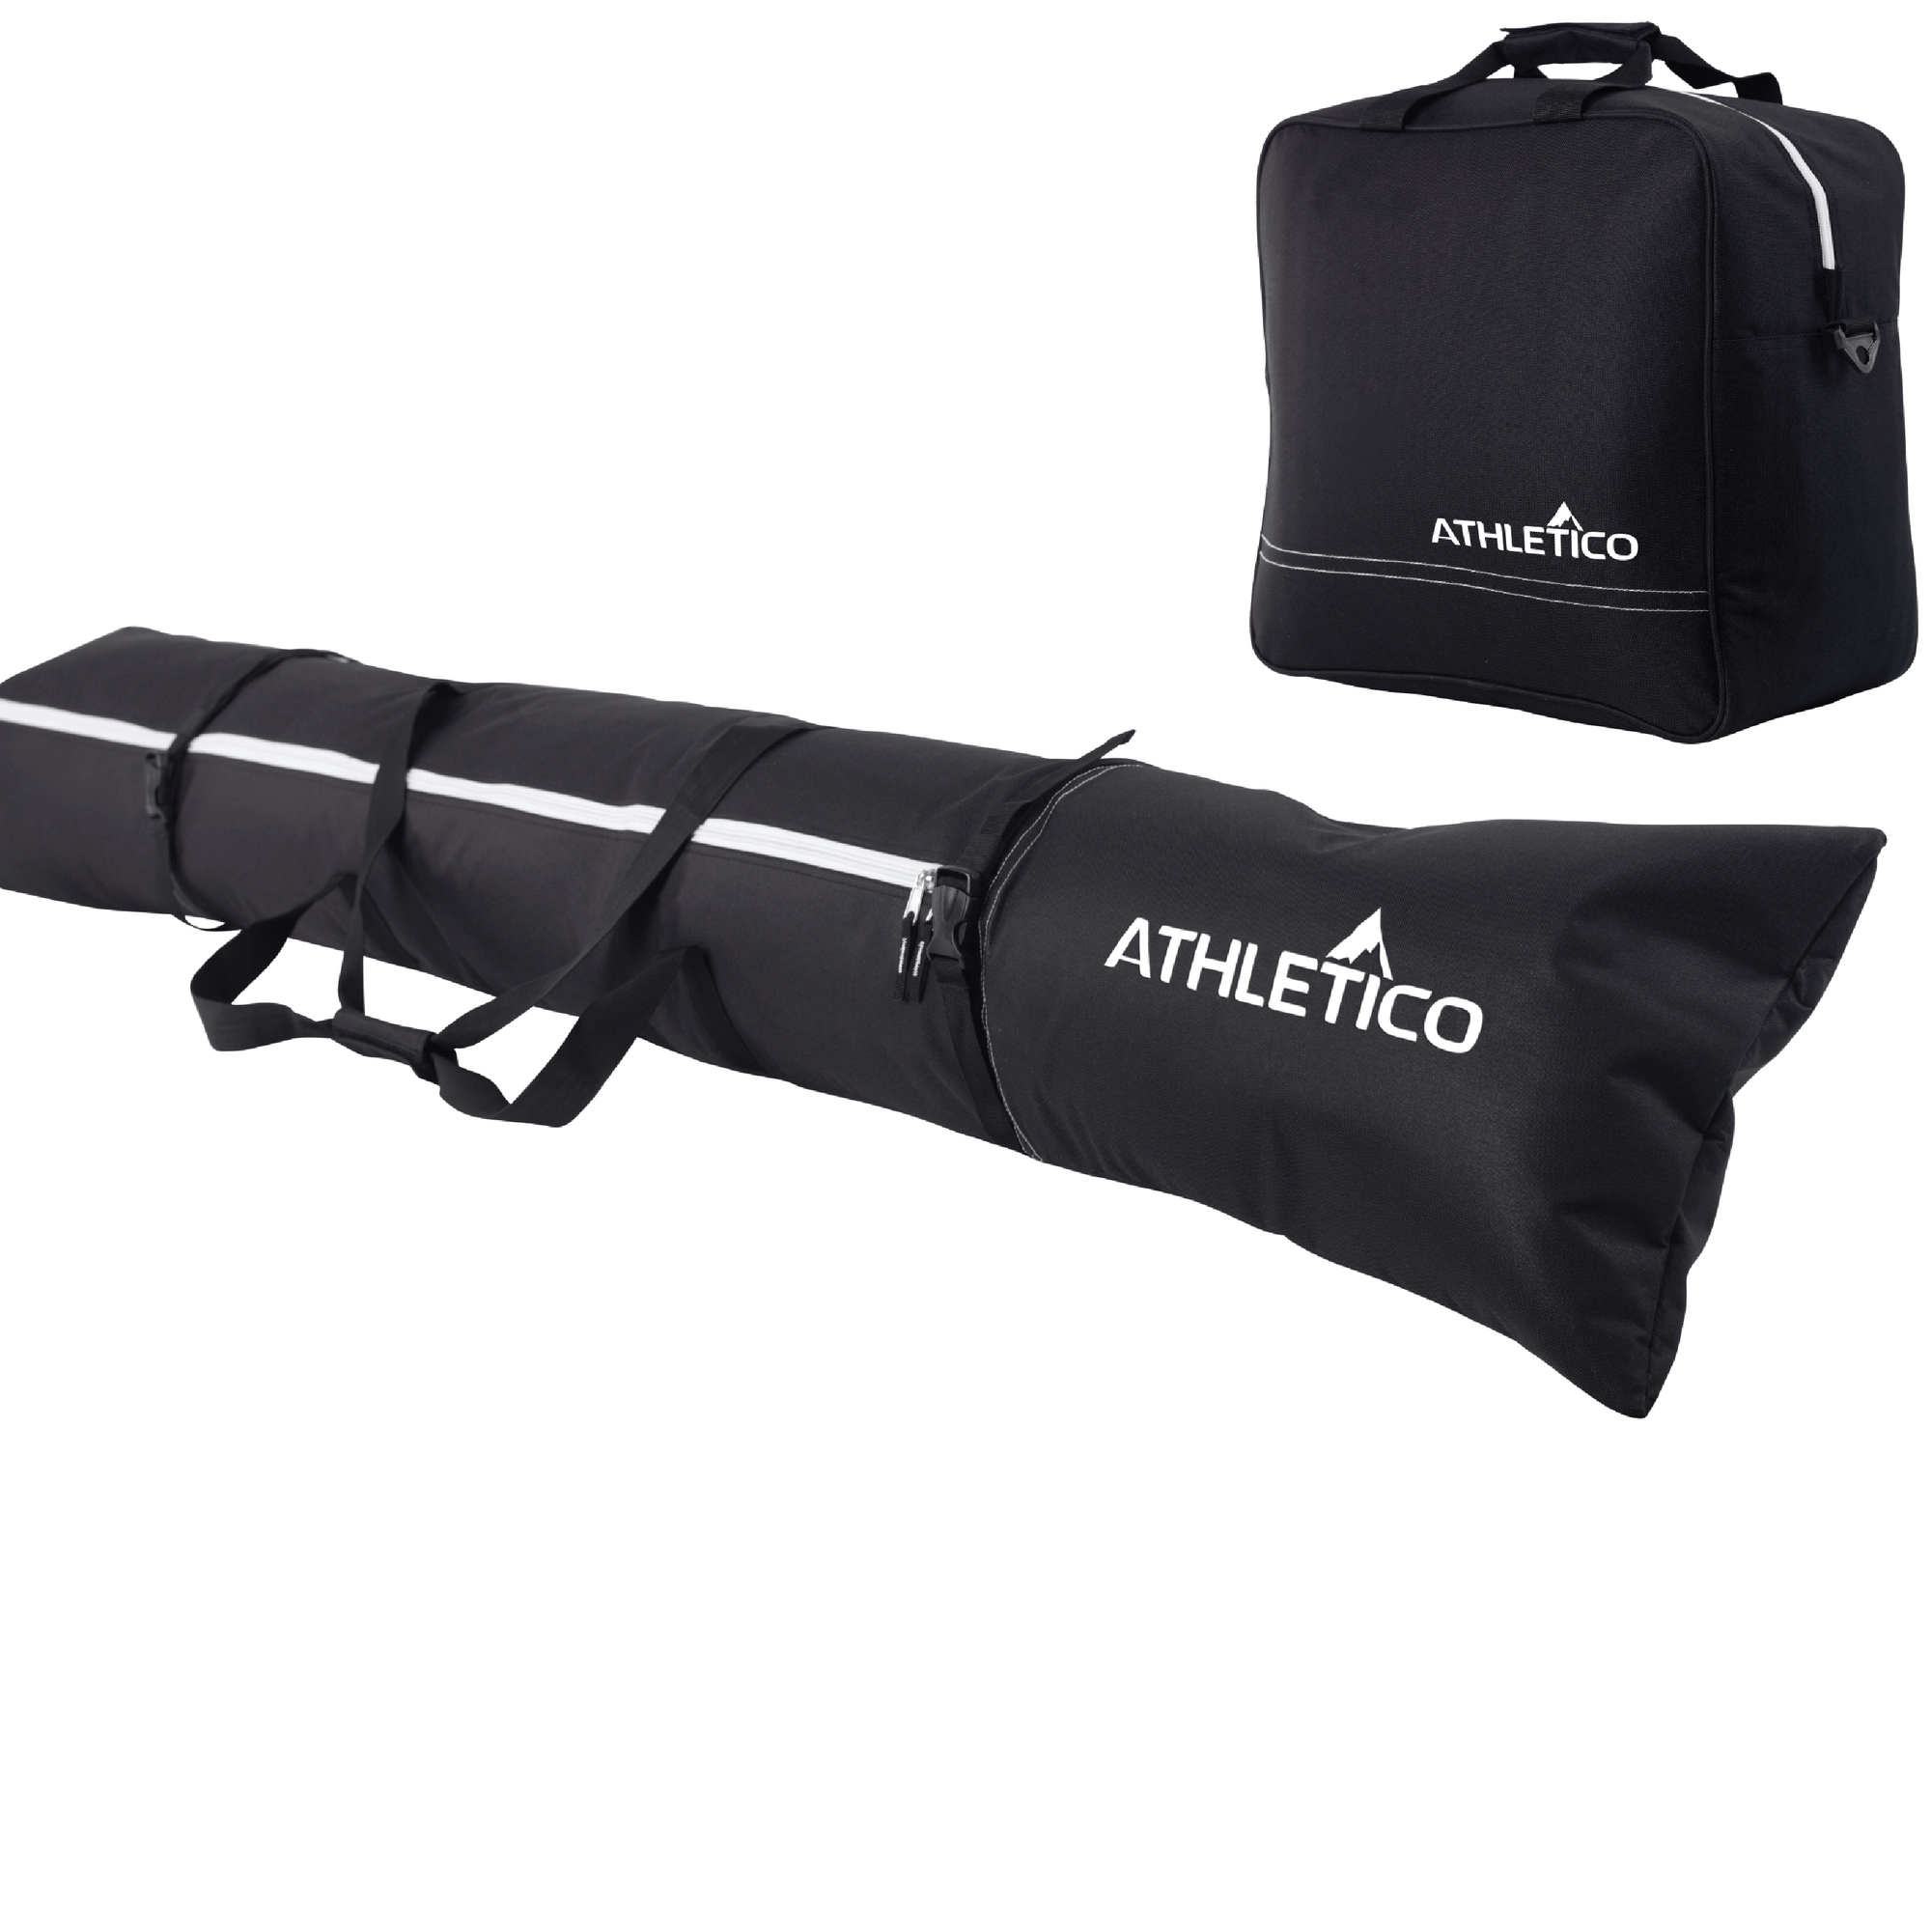 Athletico Padded Two-Piece Ski and Boot Bag Combo - Athletico